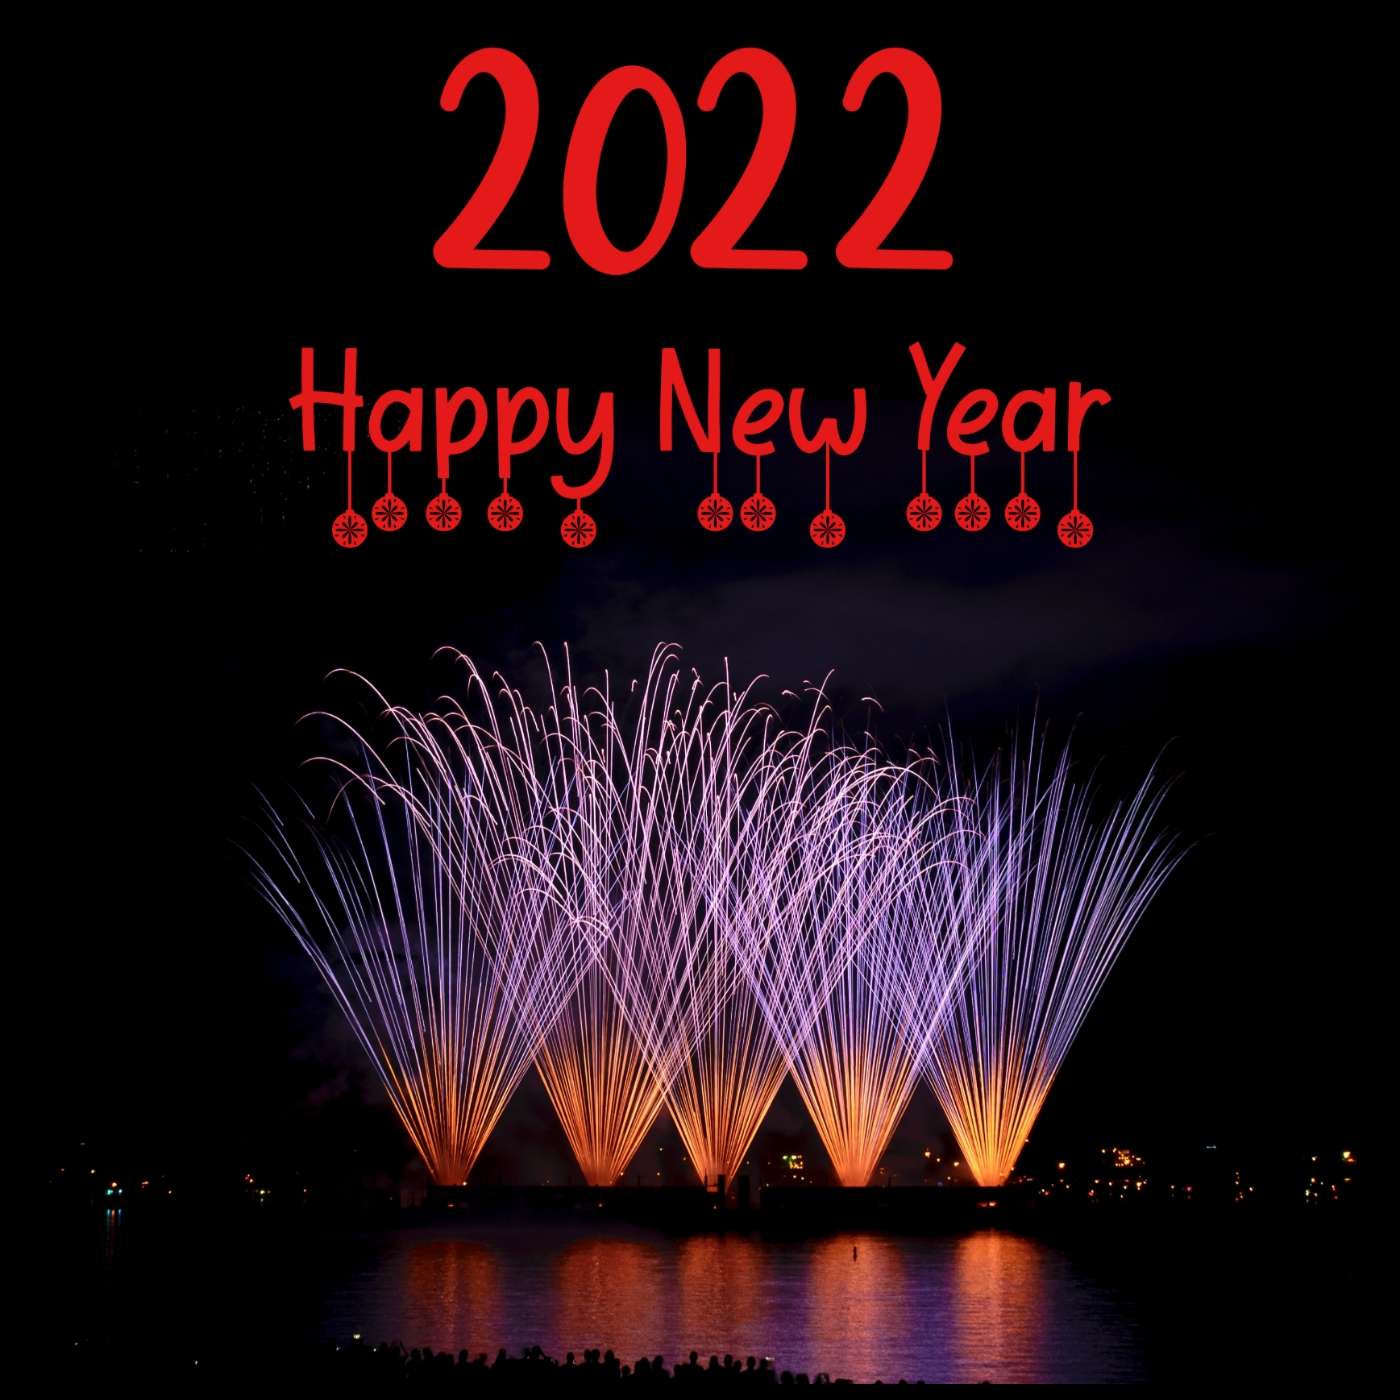 Happy New Year 2022 Free Images Download